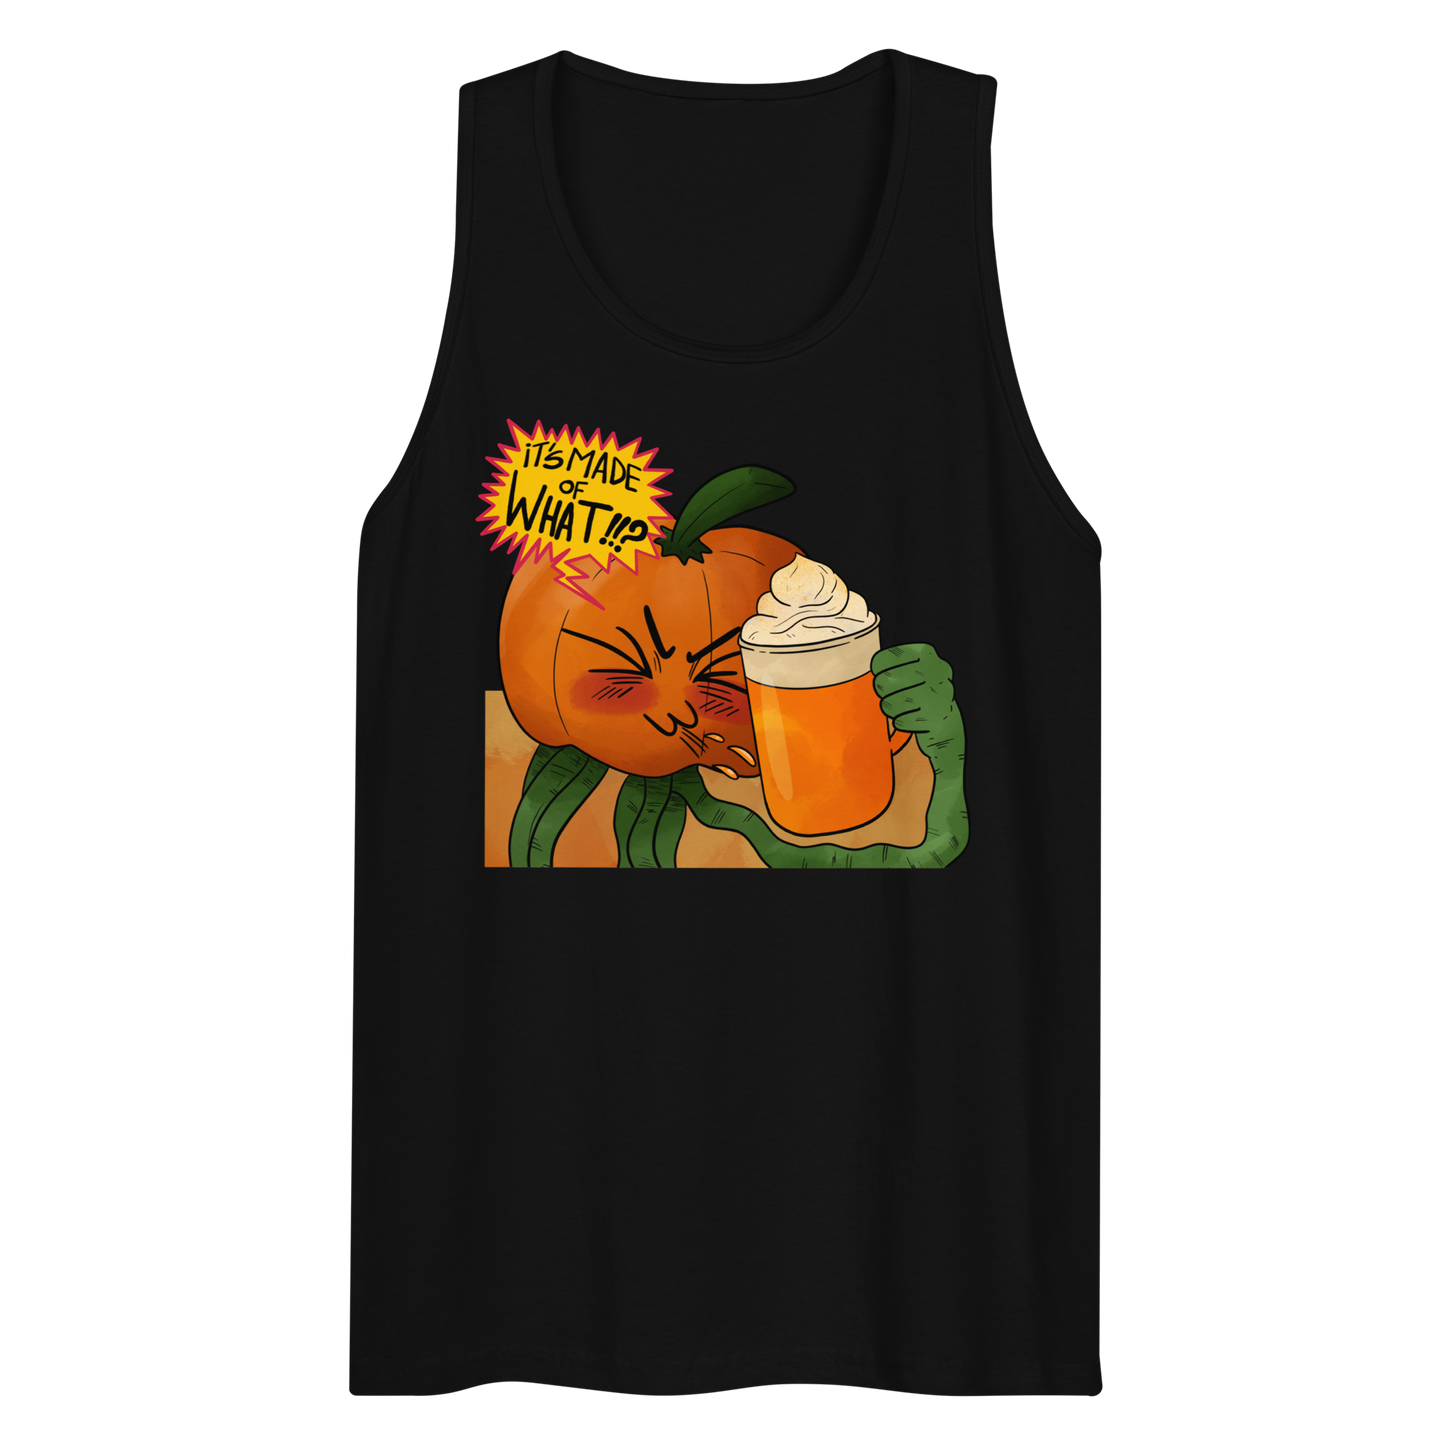 It's Made of What?! Tank Top